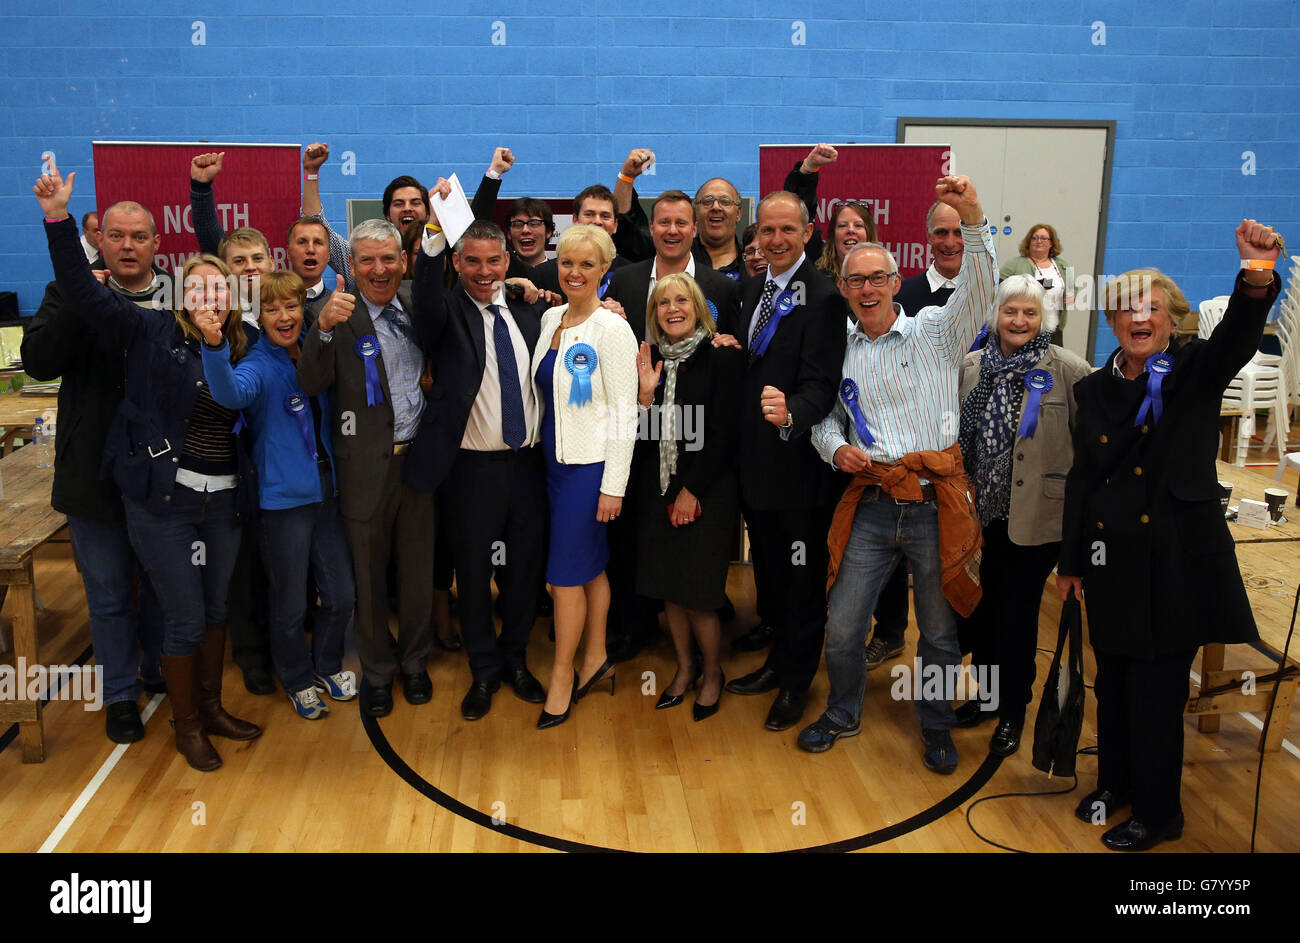 The Conservative candidate Craig Tracey celebrates winning the North Warwickshire election with his team at Coleshill Leisure Centre in Coleshill in the General Election vote. Stock Photo